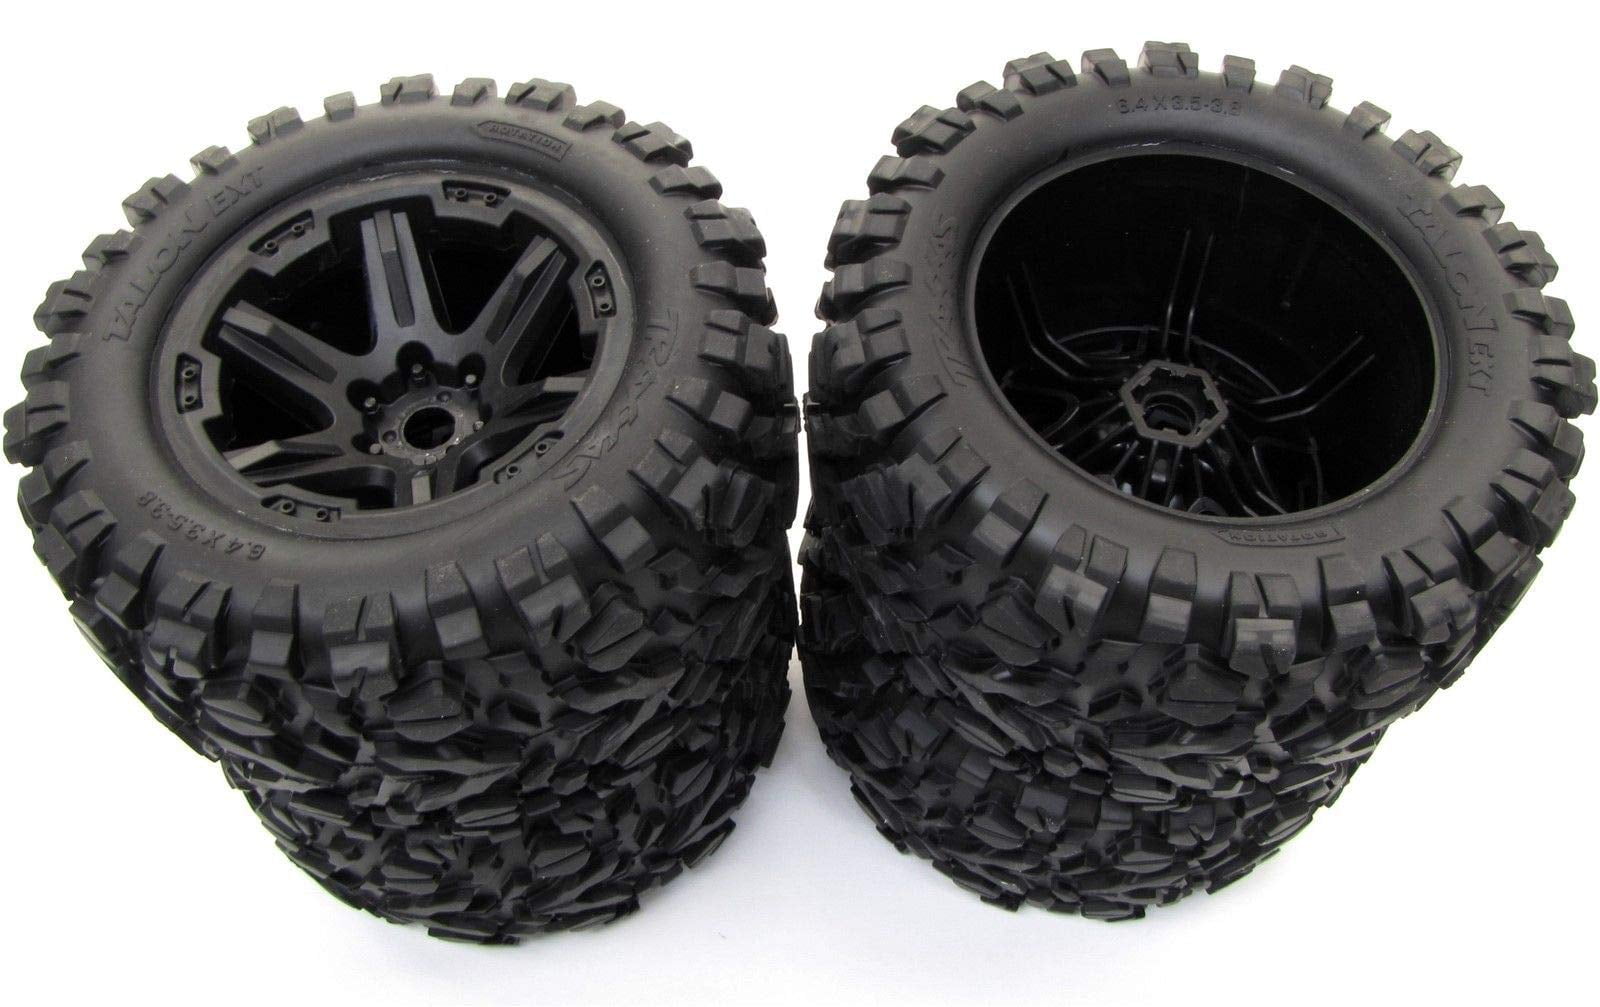 Traxxas 8672 All Terrain Talon EXT Tires and Wheels for Remote Control Cars